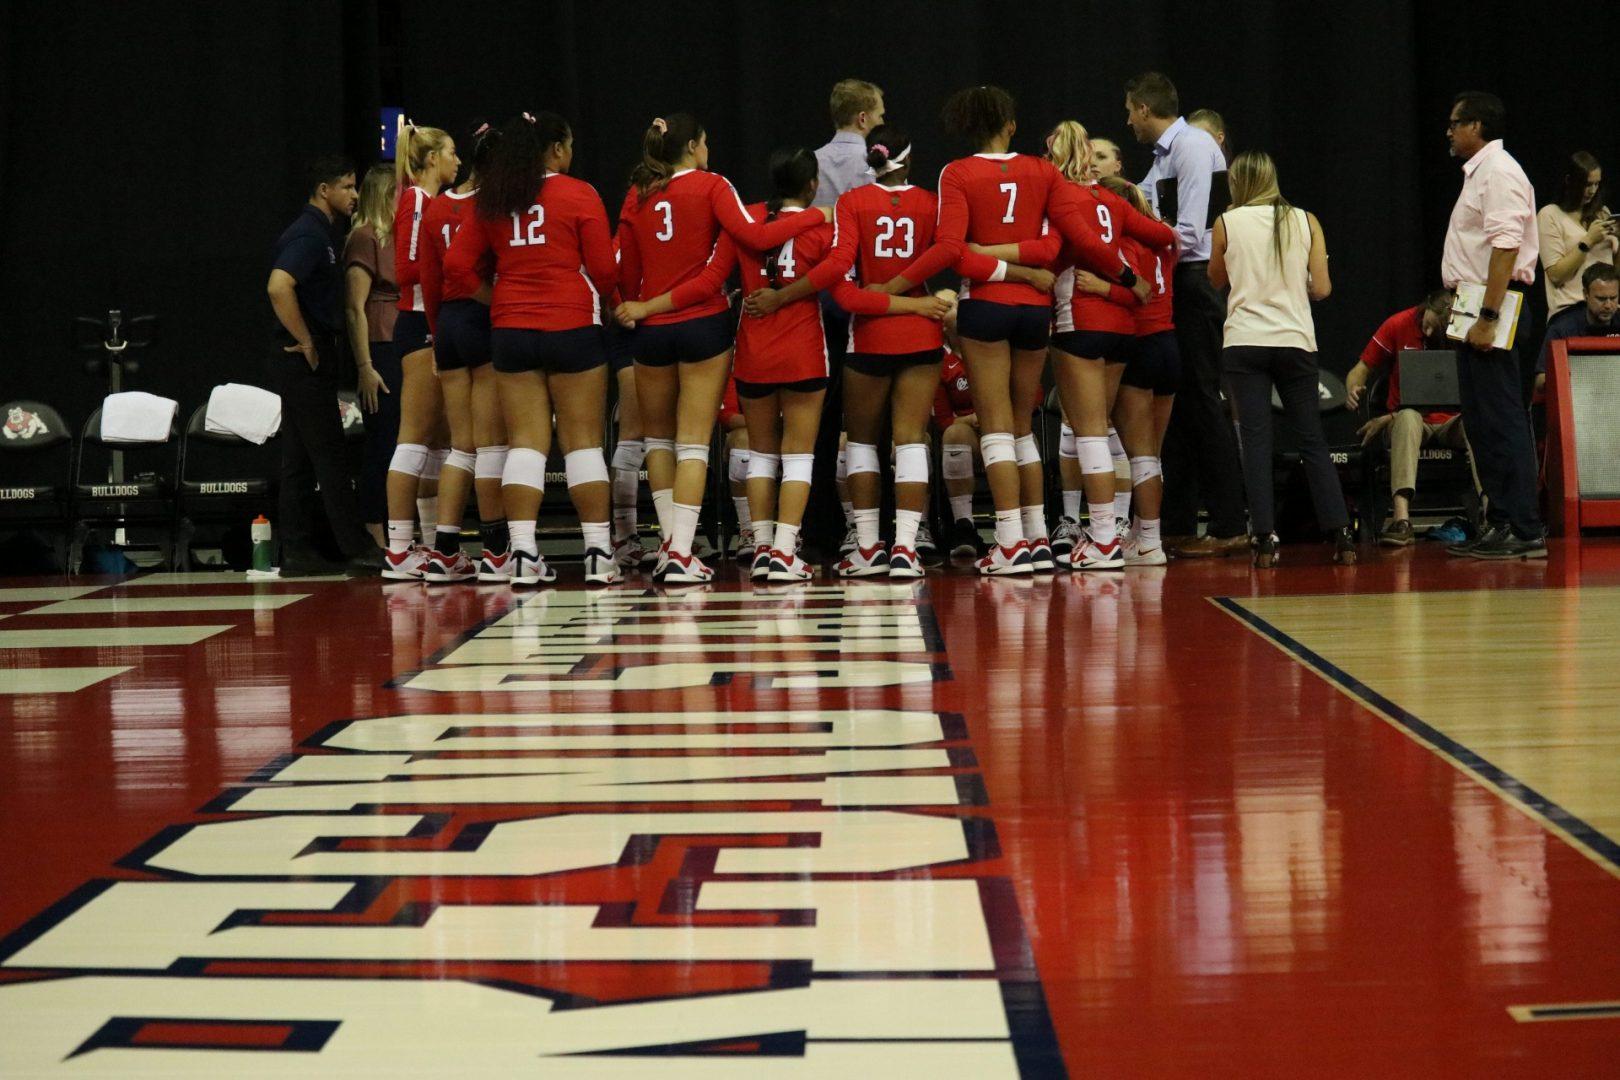 The Fresno State volleyball team during a match against the University of New Mexico Lobos at the Save Mart Center on Thursday, Oct. 3, 2019. (Armando Carreno/The Collegian)